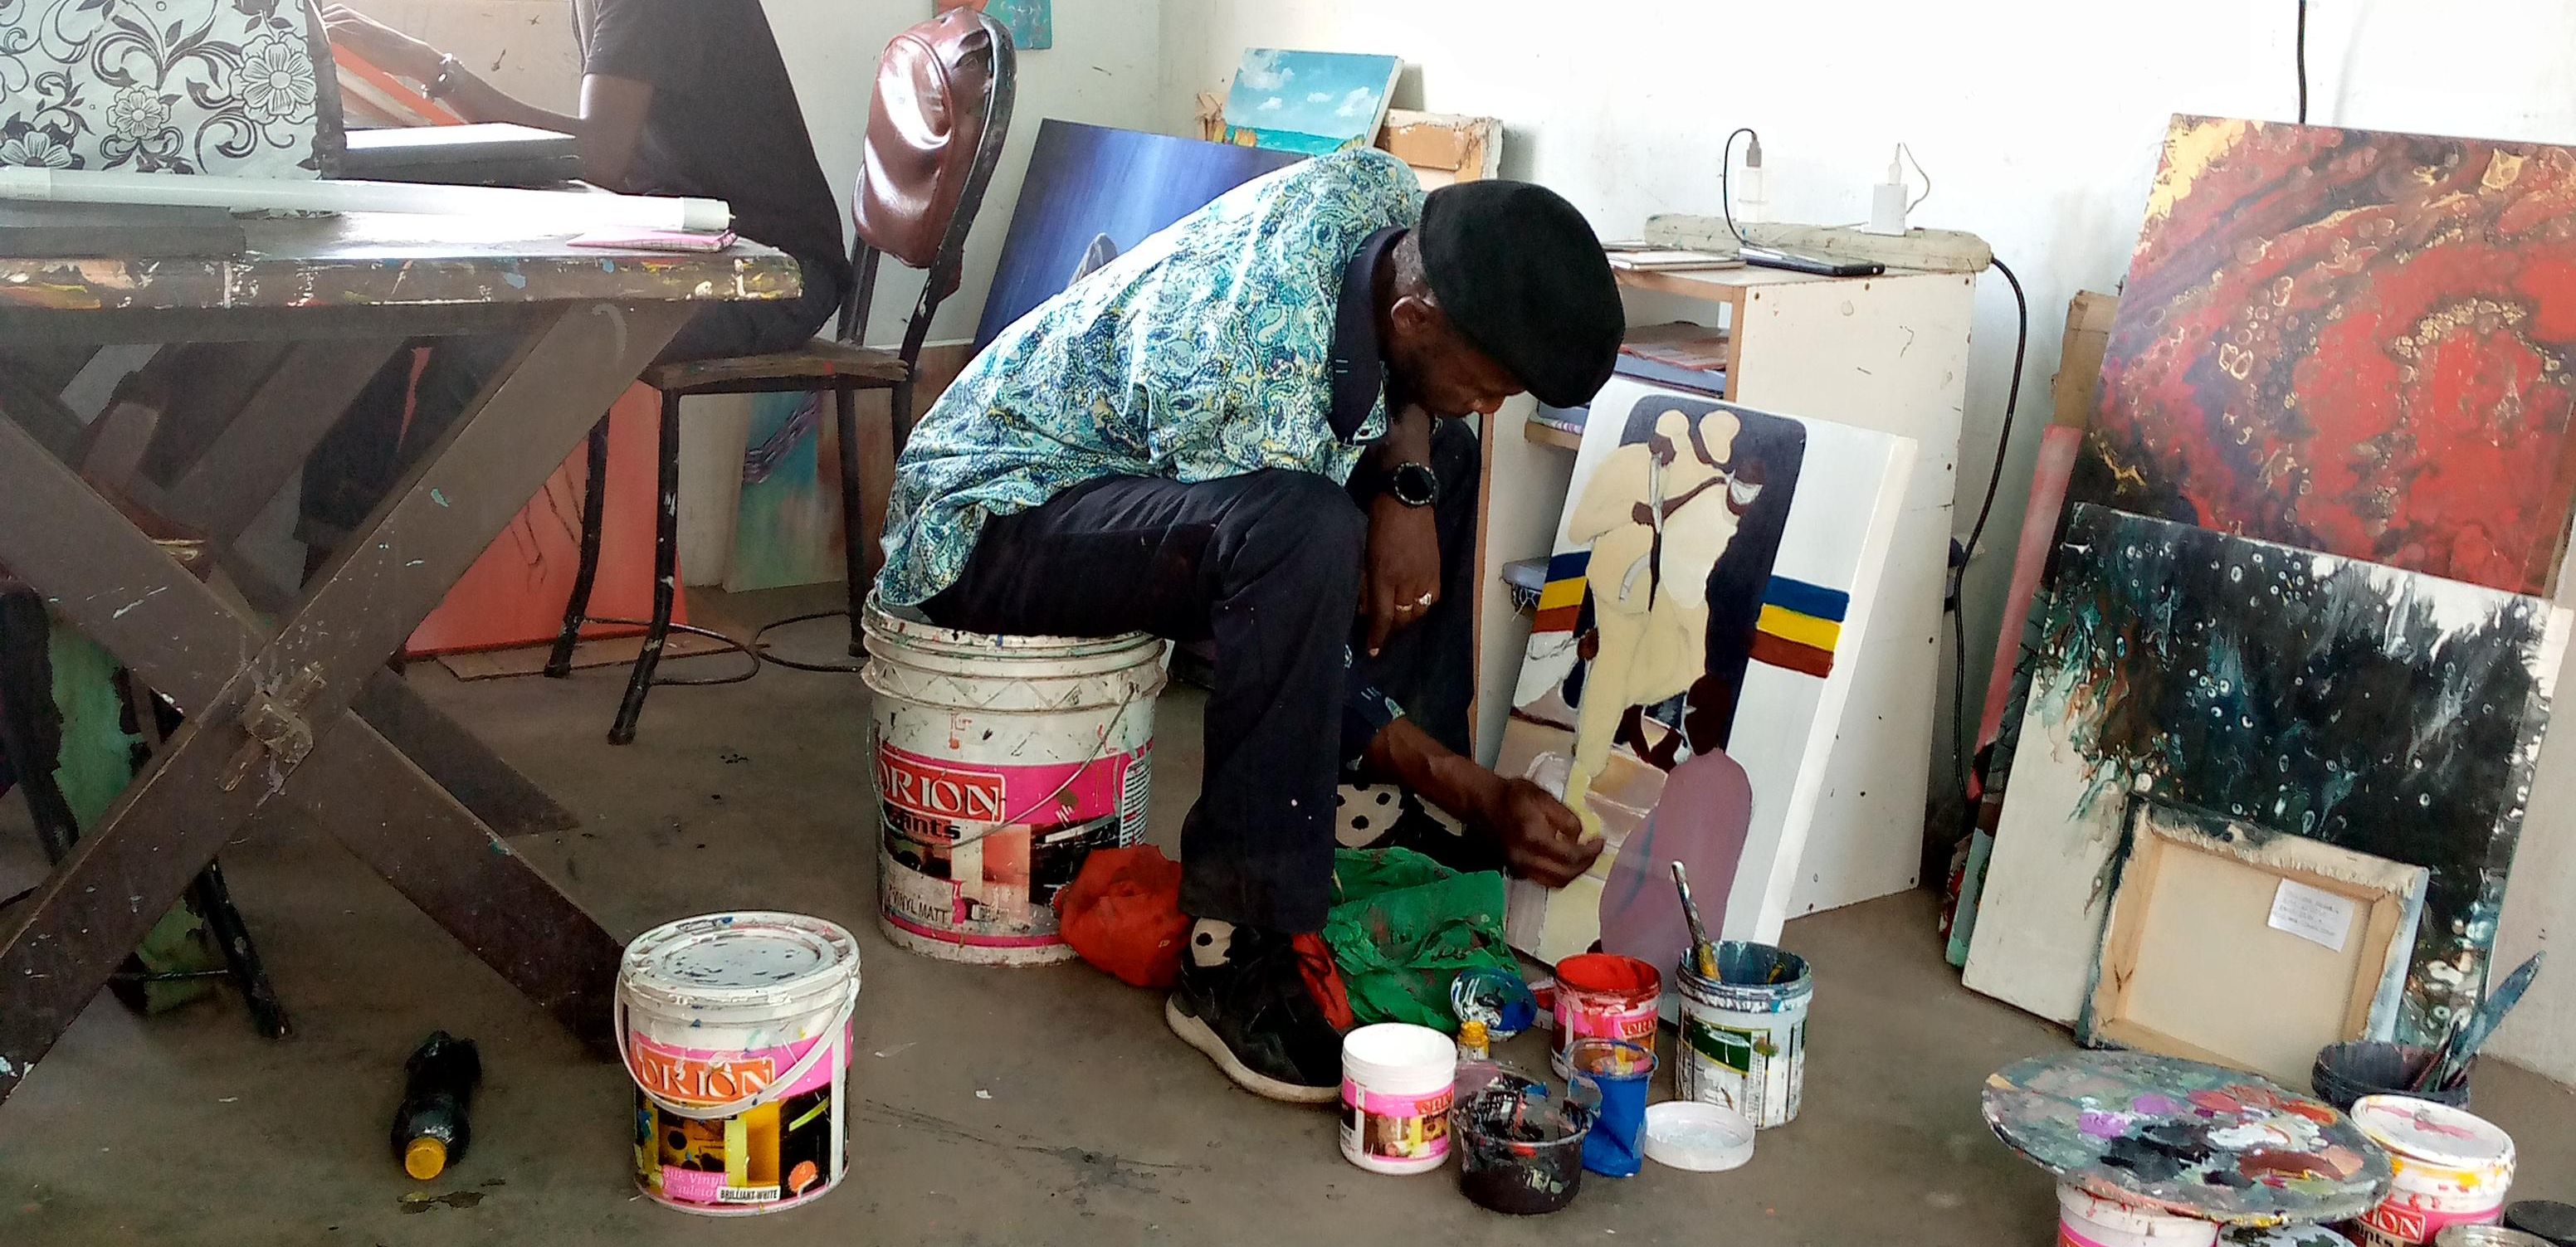 A man sitting on a bucket, painting